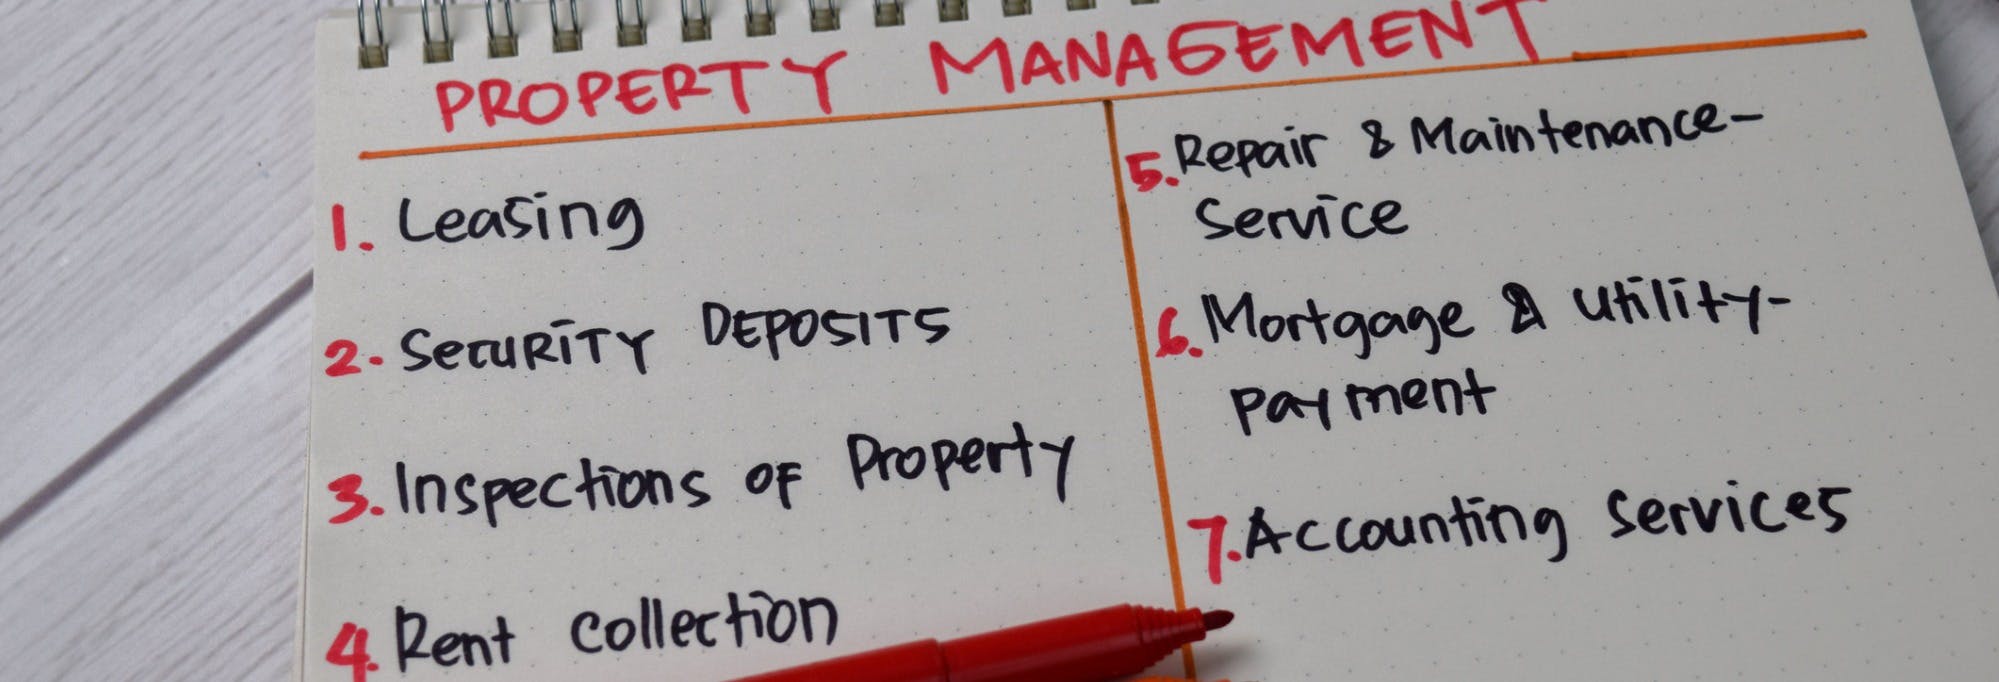 Handwritten list of property management tasks for landlords asking "can I manage my own rental property?"